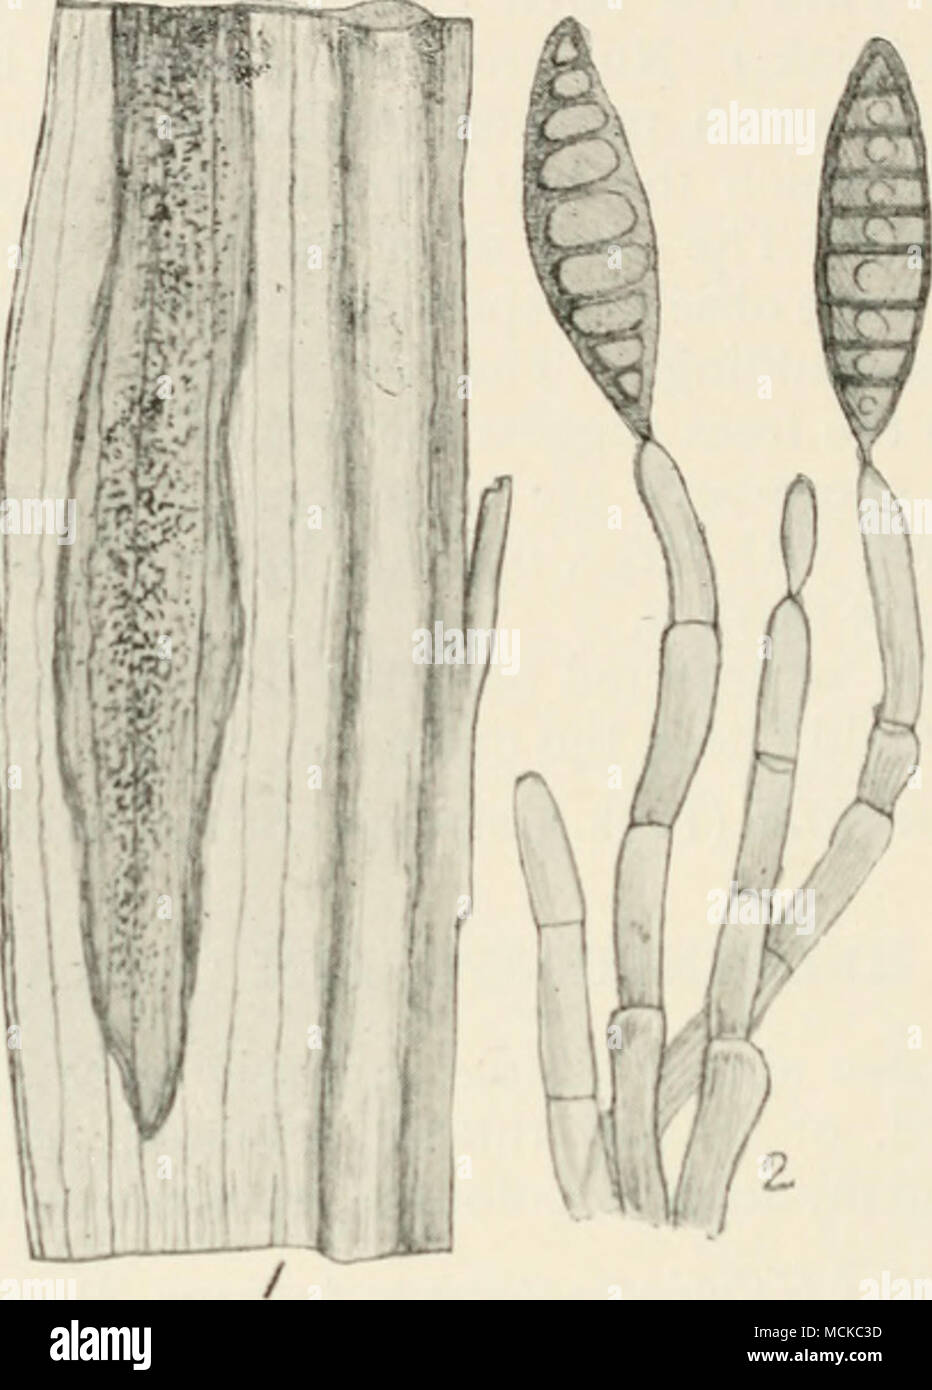 . Fig. 144.—Helmiiitii.^sportuin tincuitm. i, portion of a maize leaf with fungus ; 2, a cluster of conidiophores, two bearing conidia, highly mag. brownish spots, septate, 150-180x6-9 /x; pale olive, apex almost colourless, often nodulose; conidia spindle-shaped, ends acute, 5-8-septate, pale olive, 80-140 x 20-26 /x. A difficult disease to check, perhaps burning the stubble after corn has been gathered, if practicable, would to a certain e.tent prevent future infection. Rotation of crops, however, would be the most certain method, and as maize impoverishes the soil to a great extent, this c Stock Photo